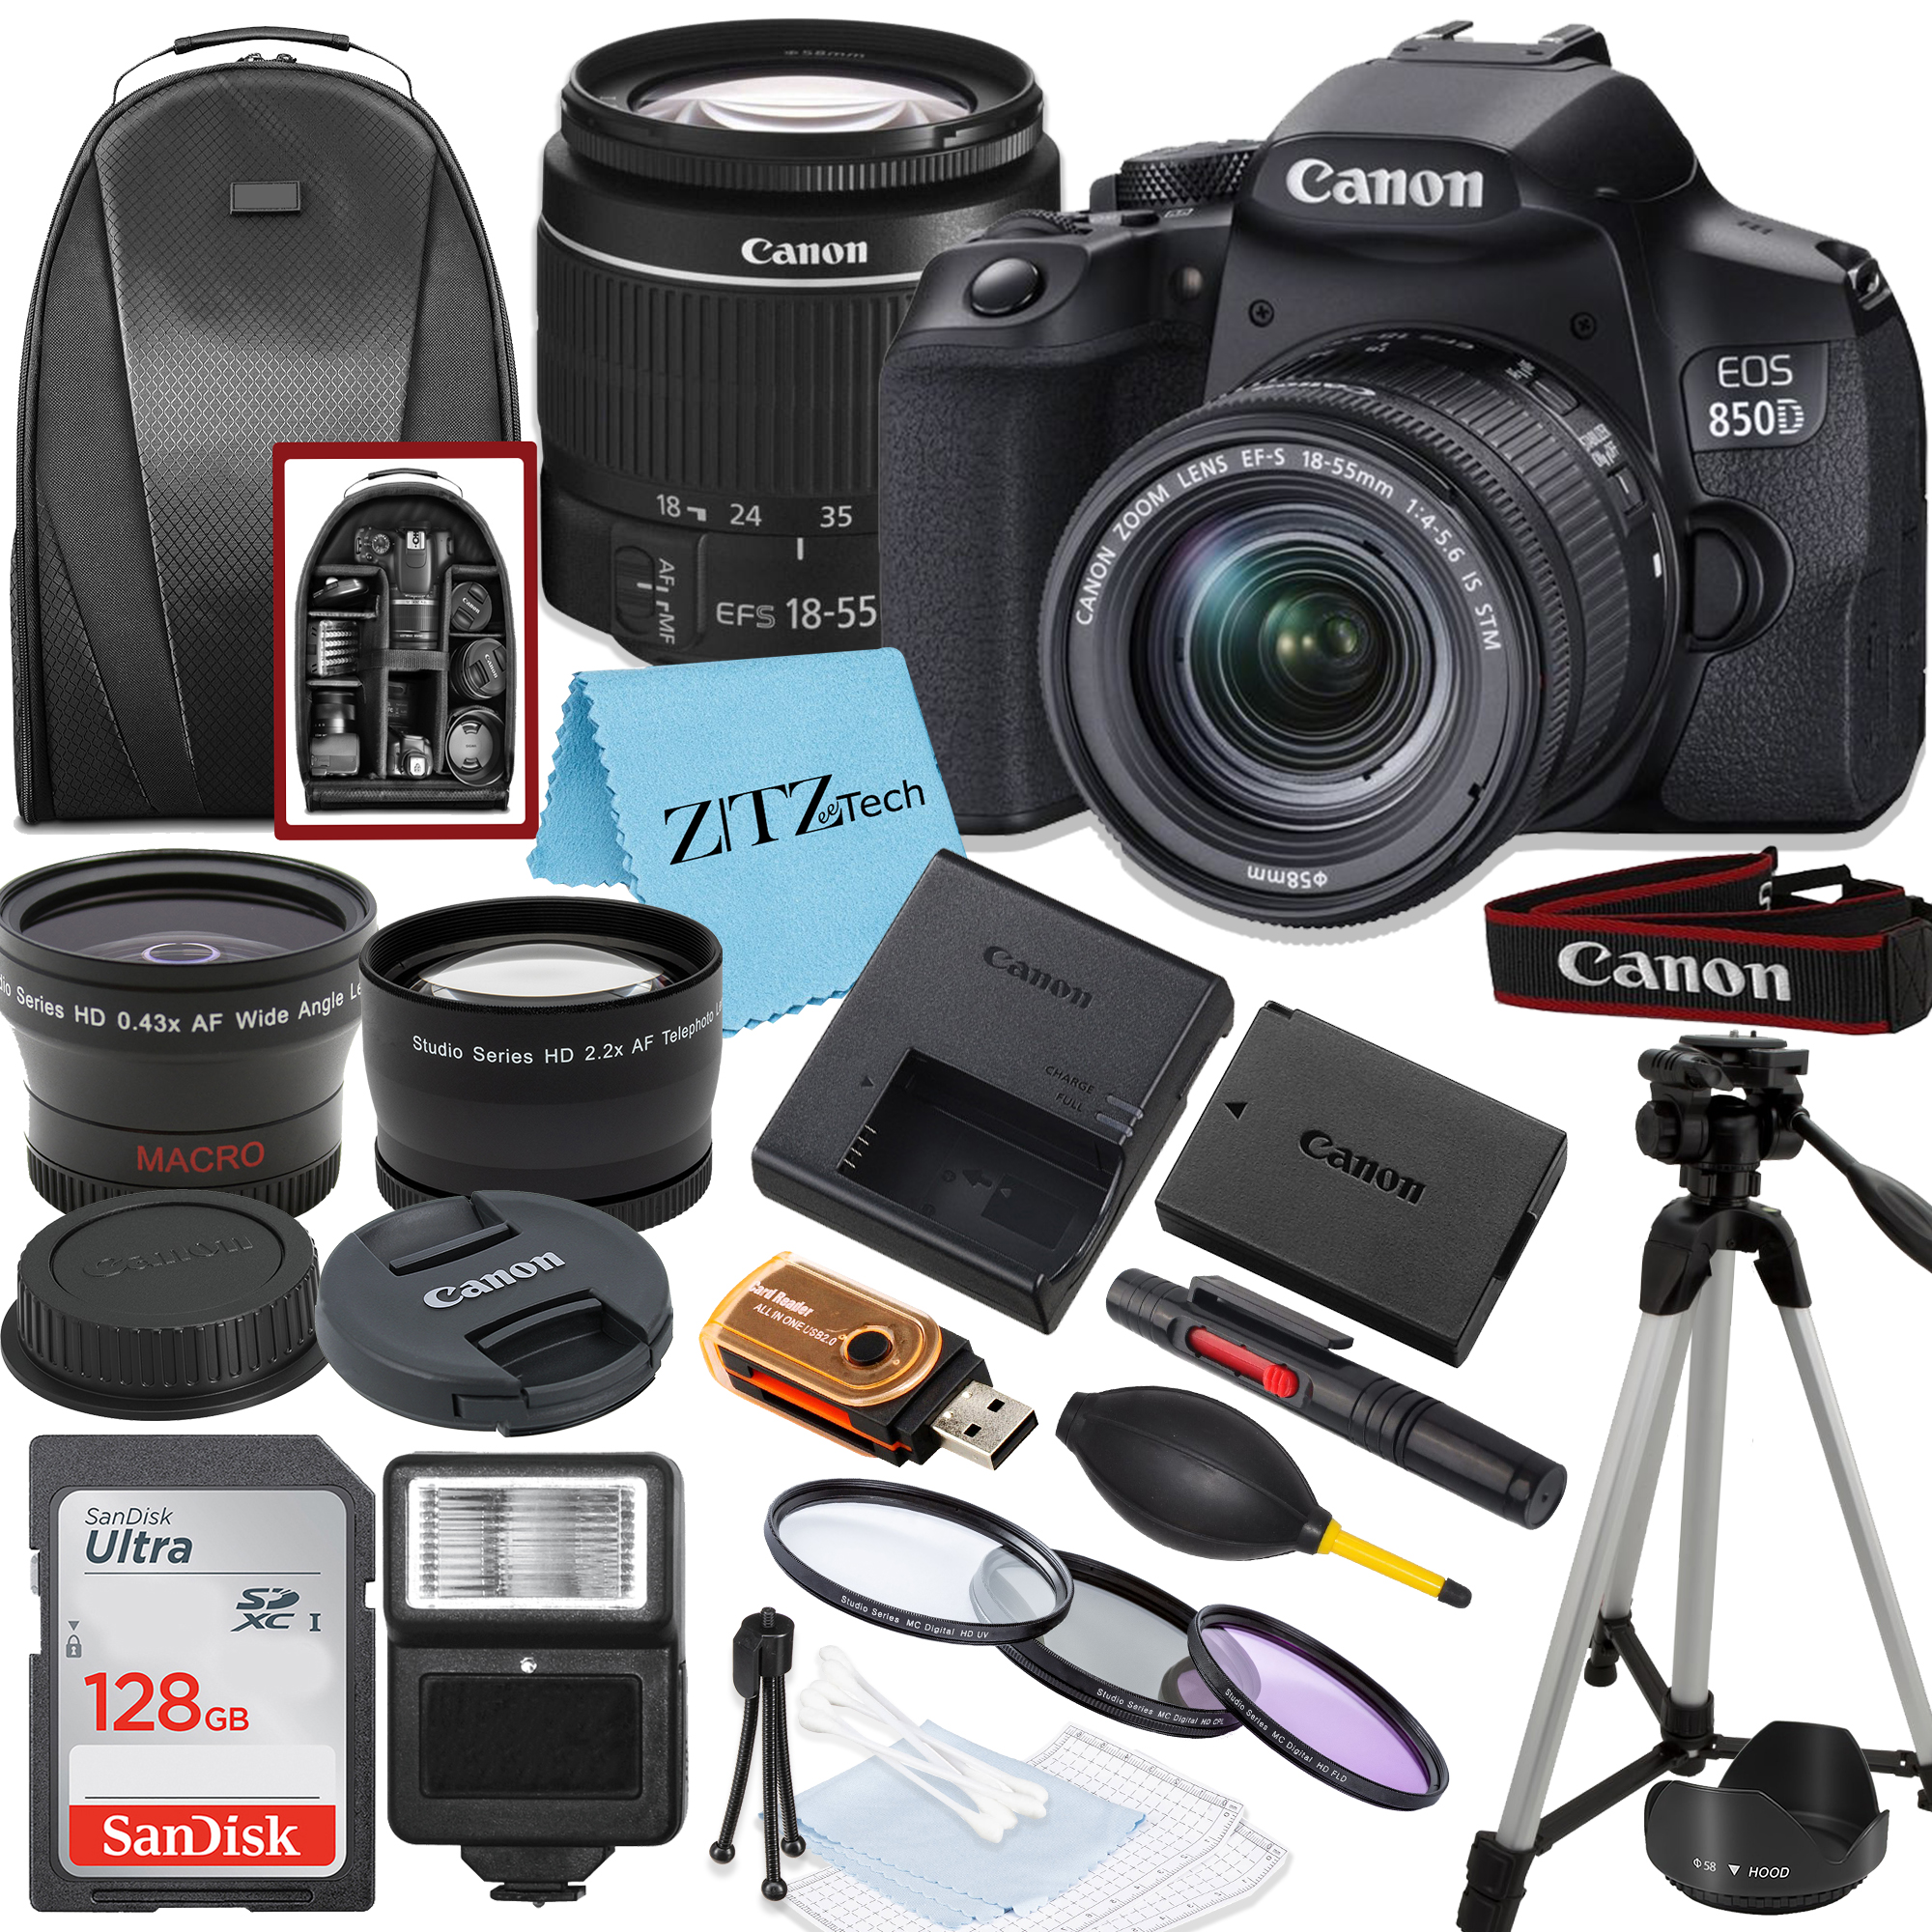 Canon EOS 850D / Rebel T8i DSLR Camera with 18-55mm Lens, SanDisk 128GB Memory, Tripod, Backpack and ZeeTech Bundle